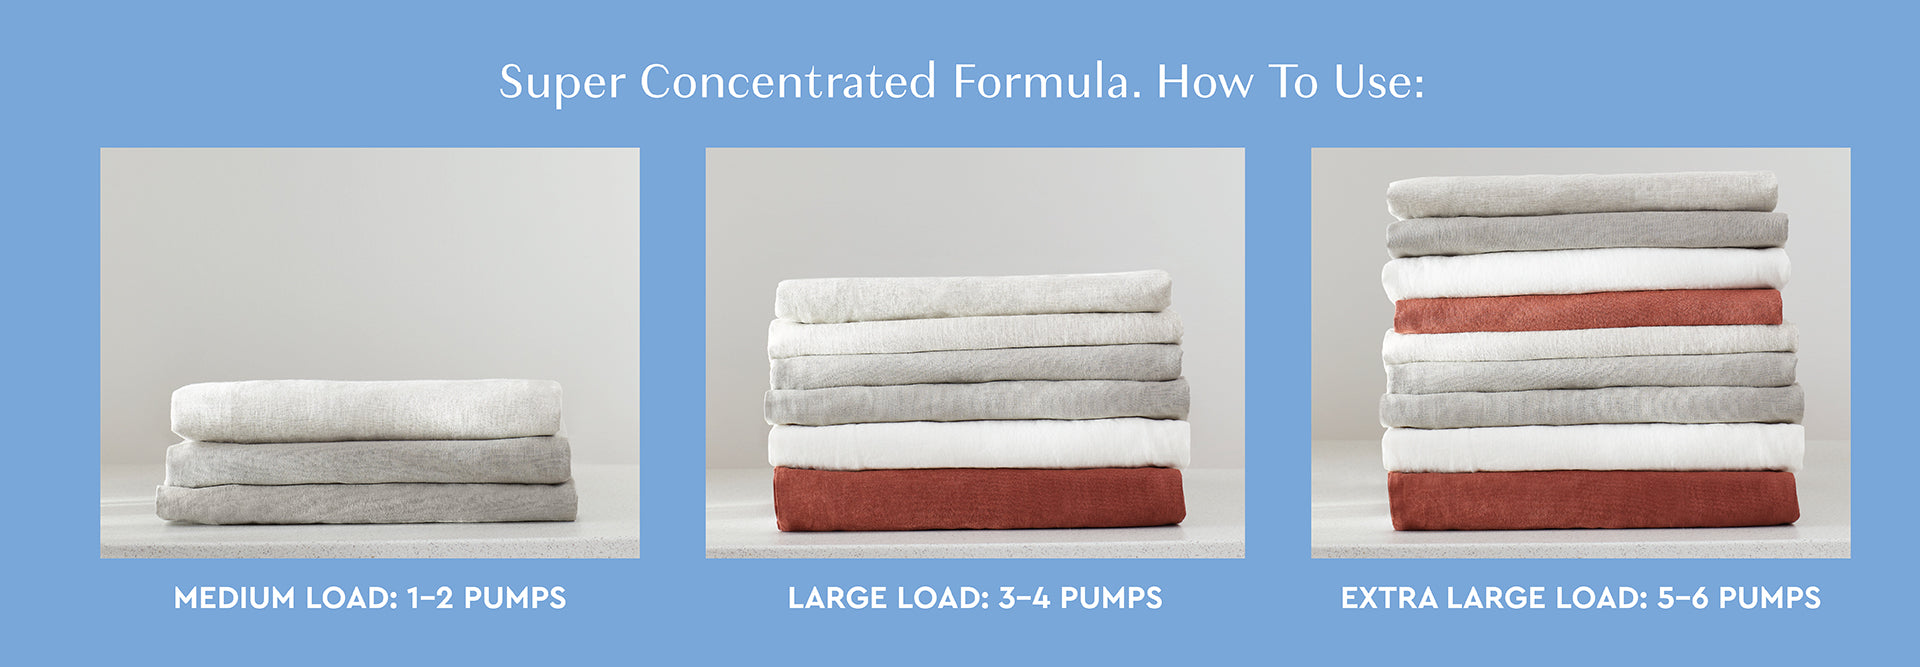 Super Concentrated Formula. How To Use - Desktop banner - 1920x667